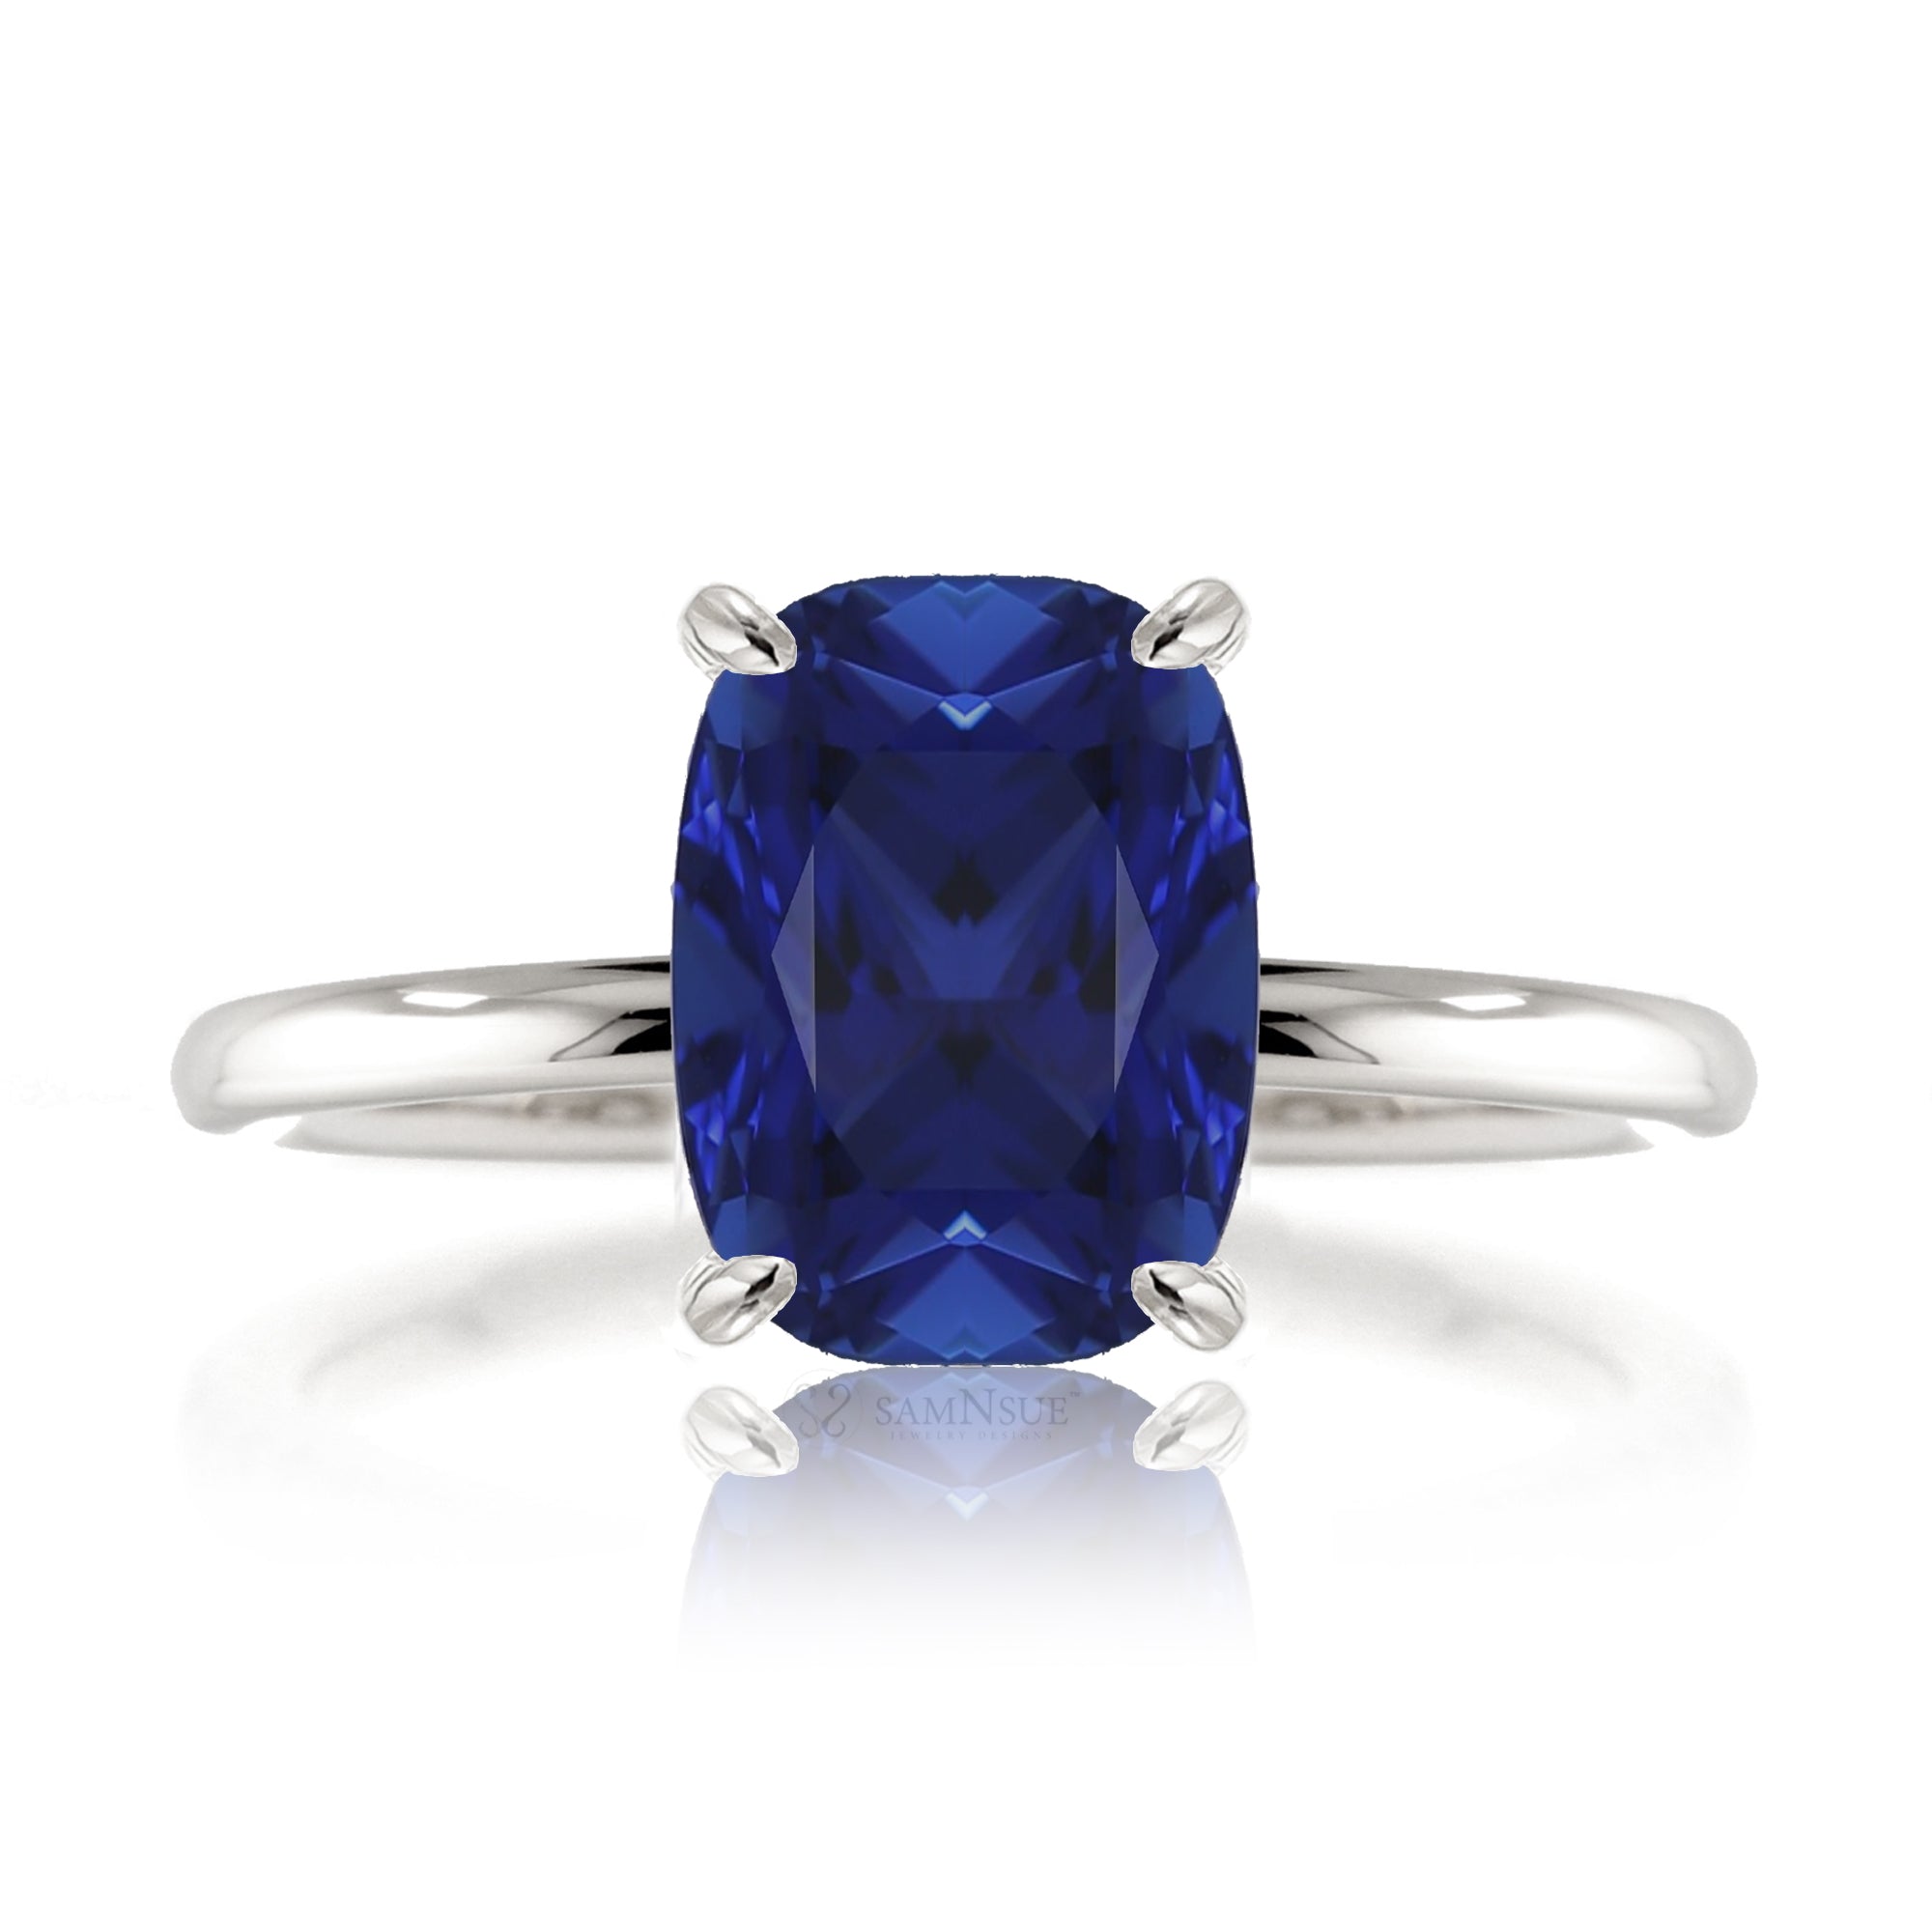 Cushion cut blue sapphire solid band engagement ring white gold - the Ava